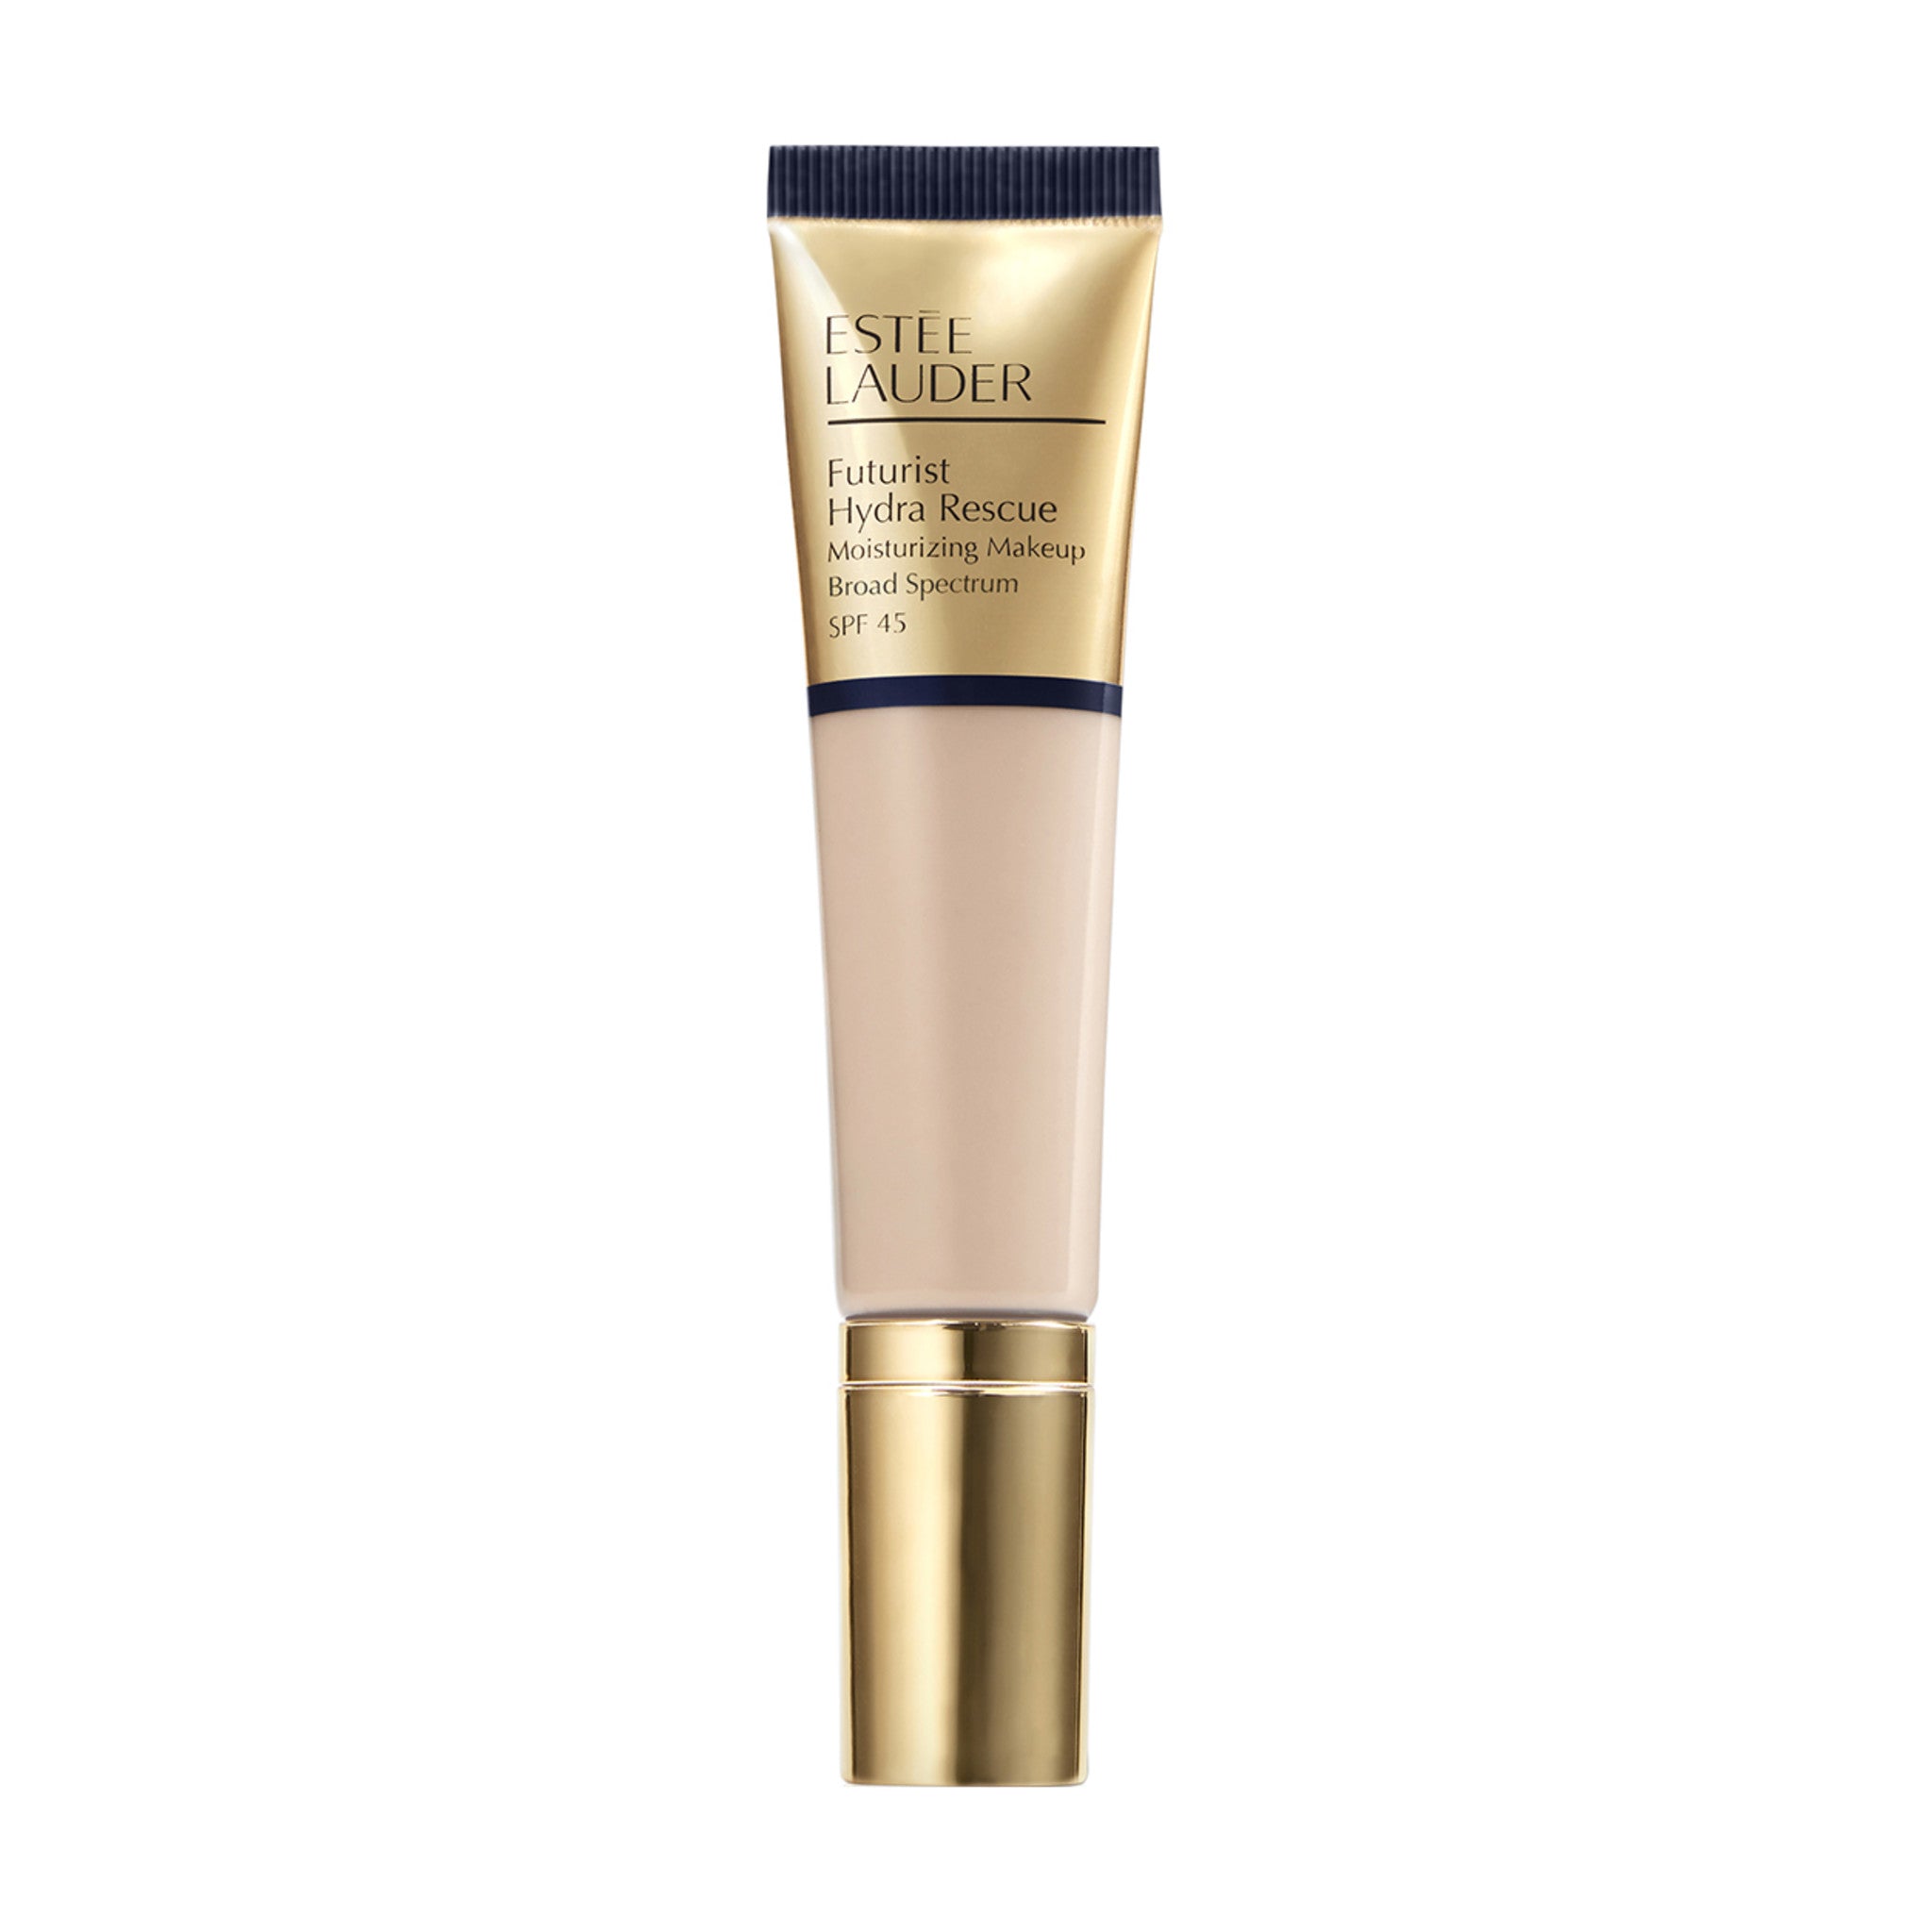 Estée Lauder Futurist Hydra Rescue Moisturizing Makeup SPF 45 Color/Shade variant: 1C1 Cool Bone main image. This product is for light cool peach complexions